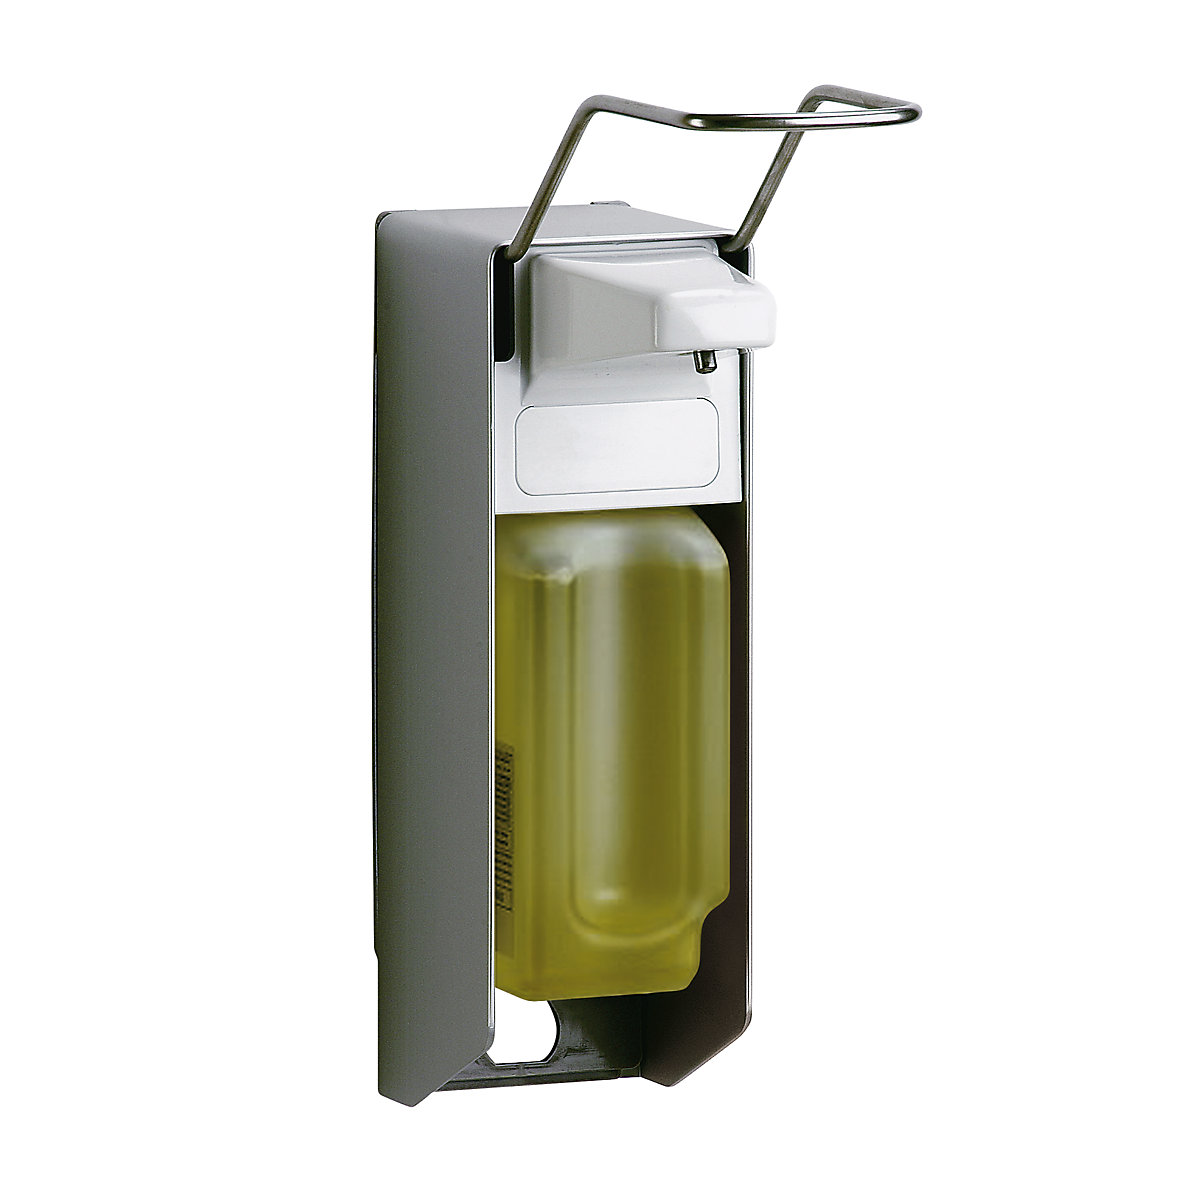 Universal dispenser, 0.5 l, for wall mounting – CWS